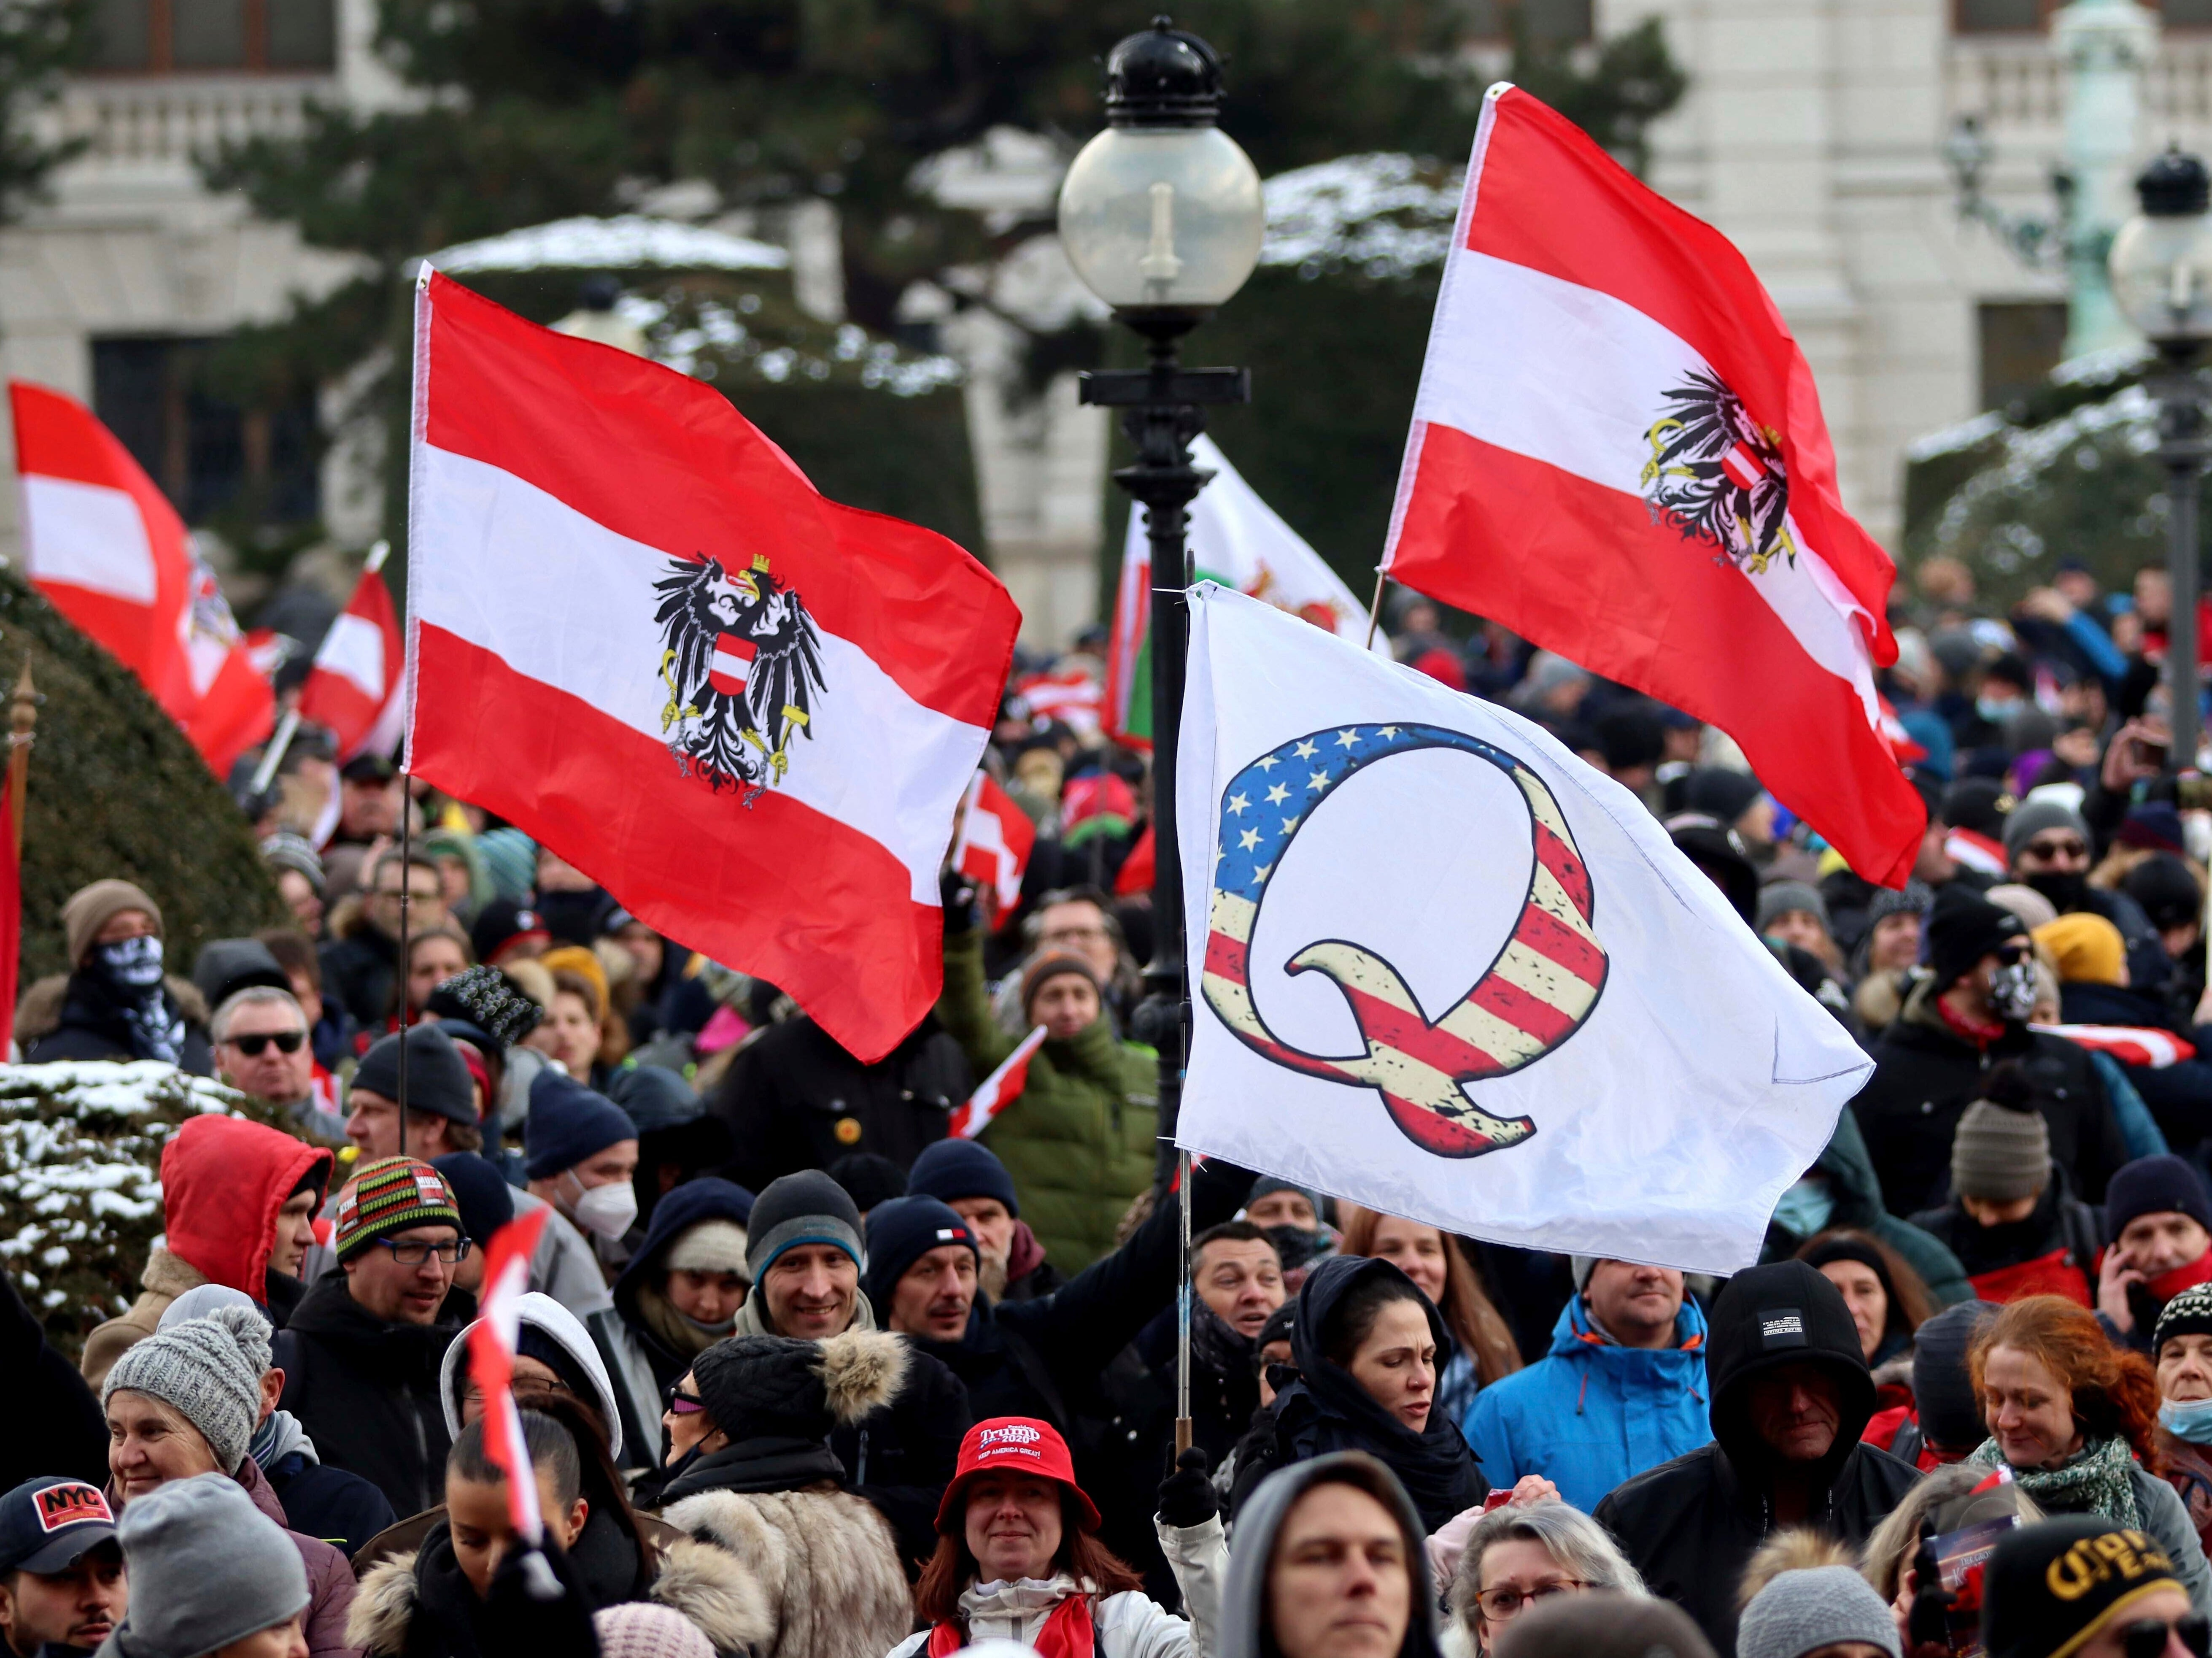 Demonstrators waves Austrian and QAnon flags during a protest against government restriction measures to curb the spread of Covid-19 in Vienna, Austria, on Saturday 16 January 2021